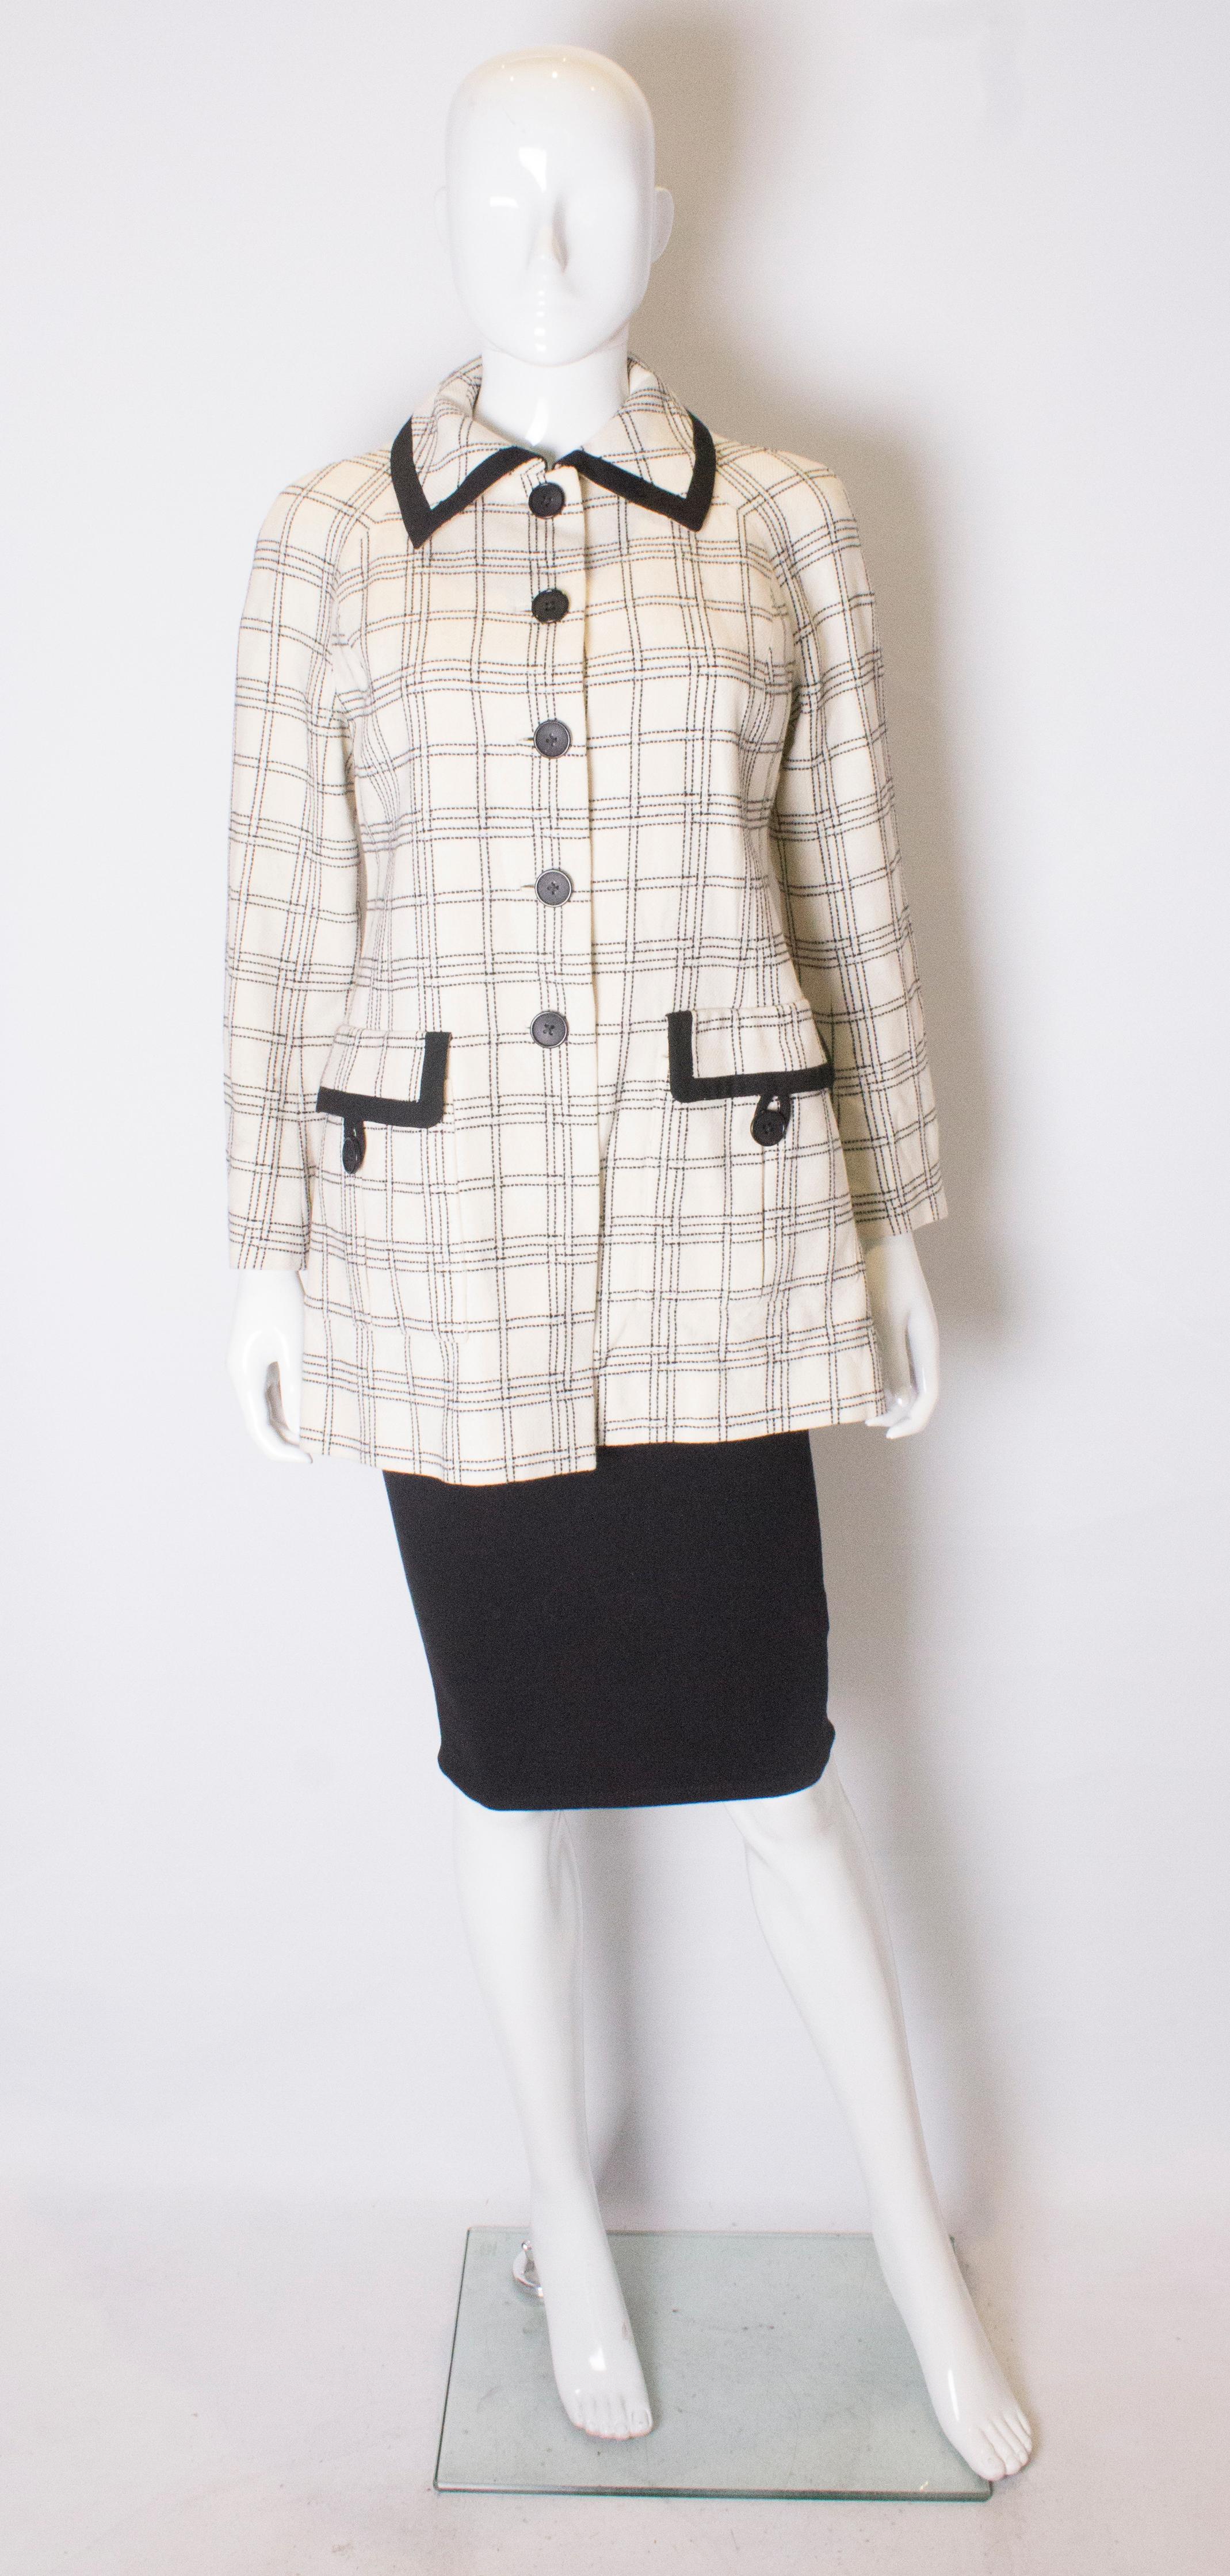 A cute jacket for Spring with great pocket detail. The jacket has an ivory background with black stitching and trim detail. It has two pockets with fold over flaps and button loops. It has a five button opening and is fully lined.